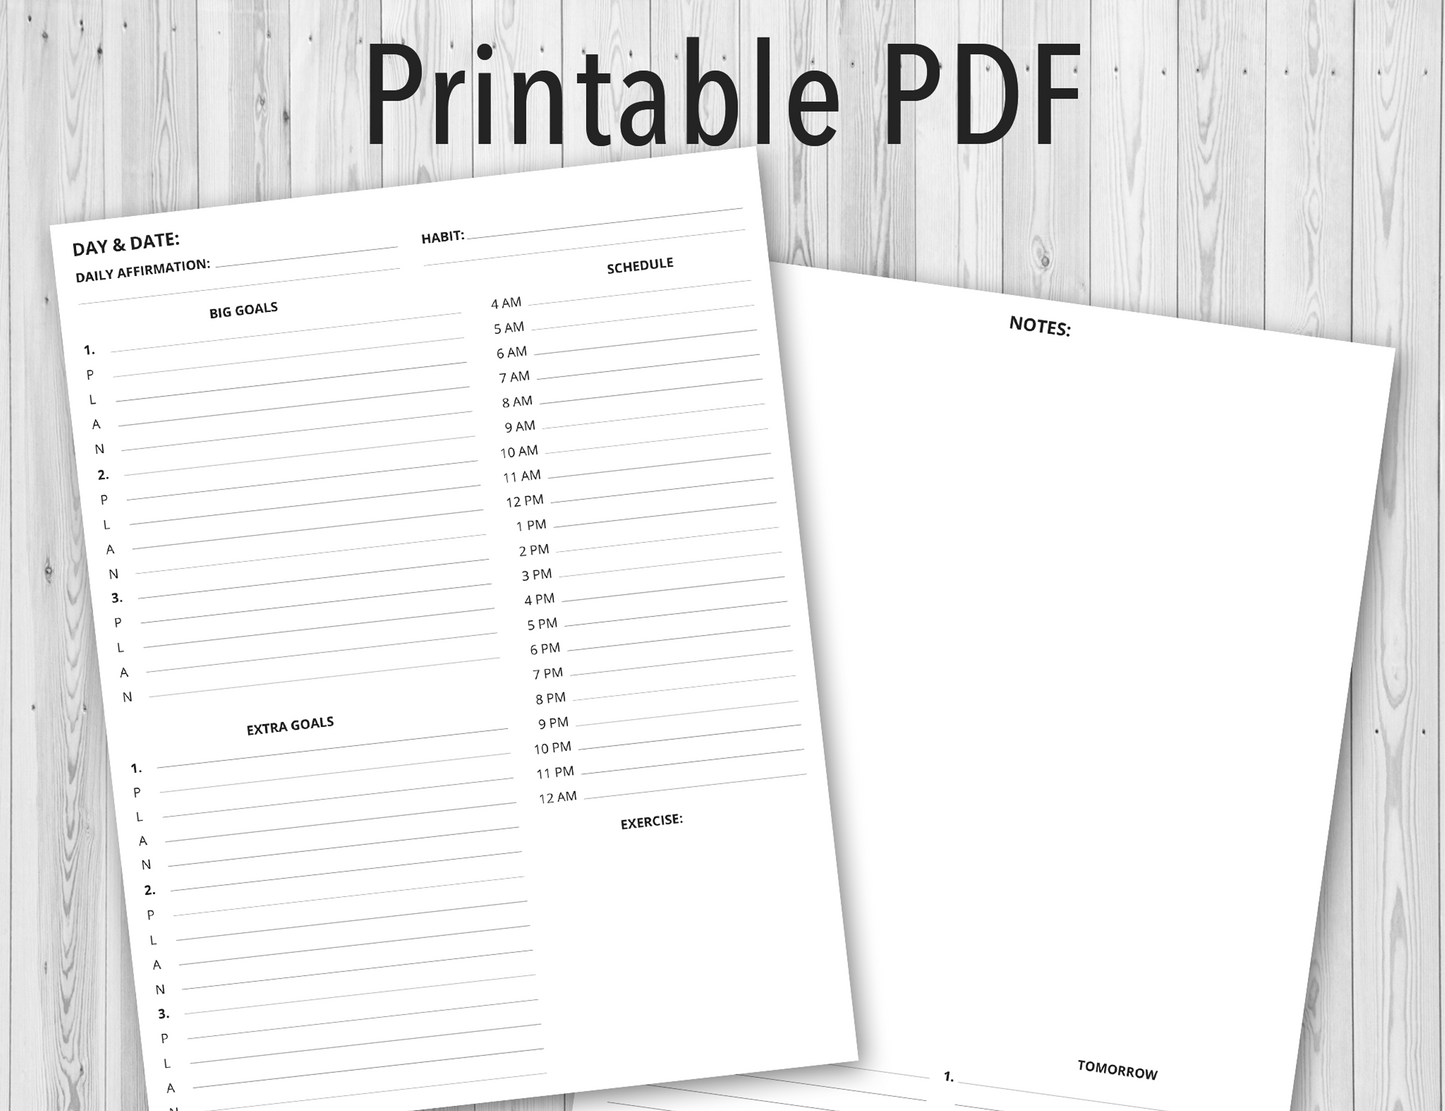 Printable PDF Personal Planner, Day and Date, Notes